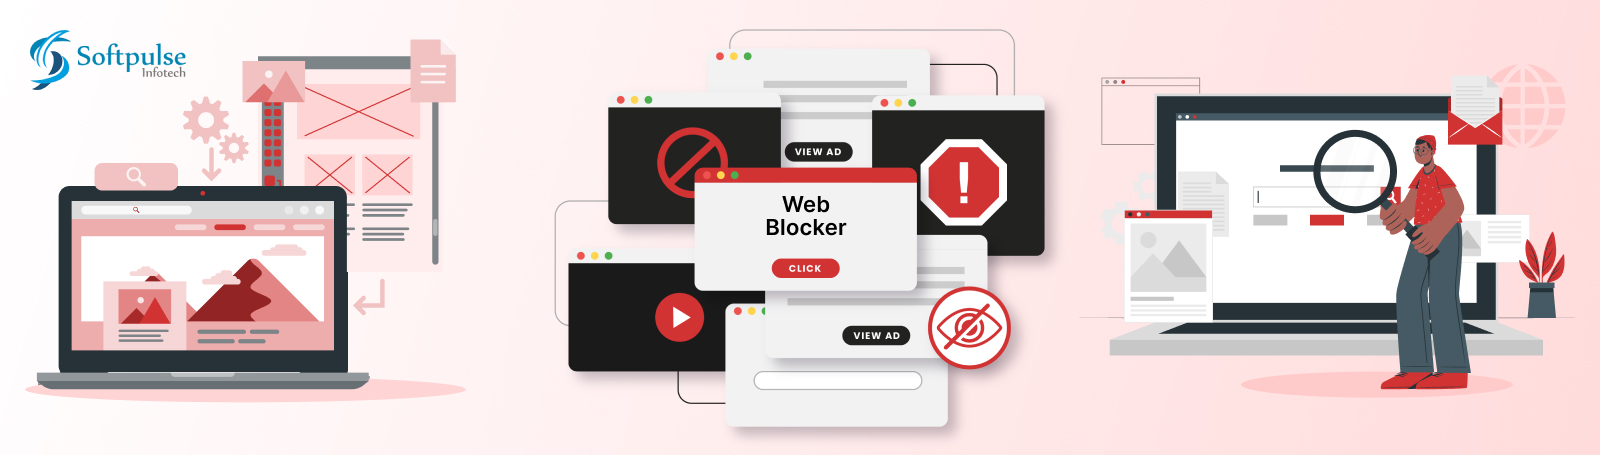 Web Blocker Extension: Access To Block Or Unblock Specific URLs on Chrome Browser